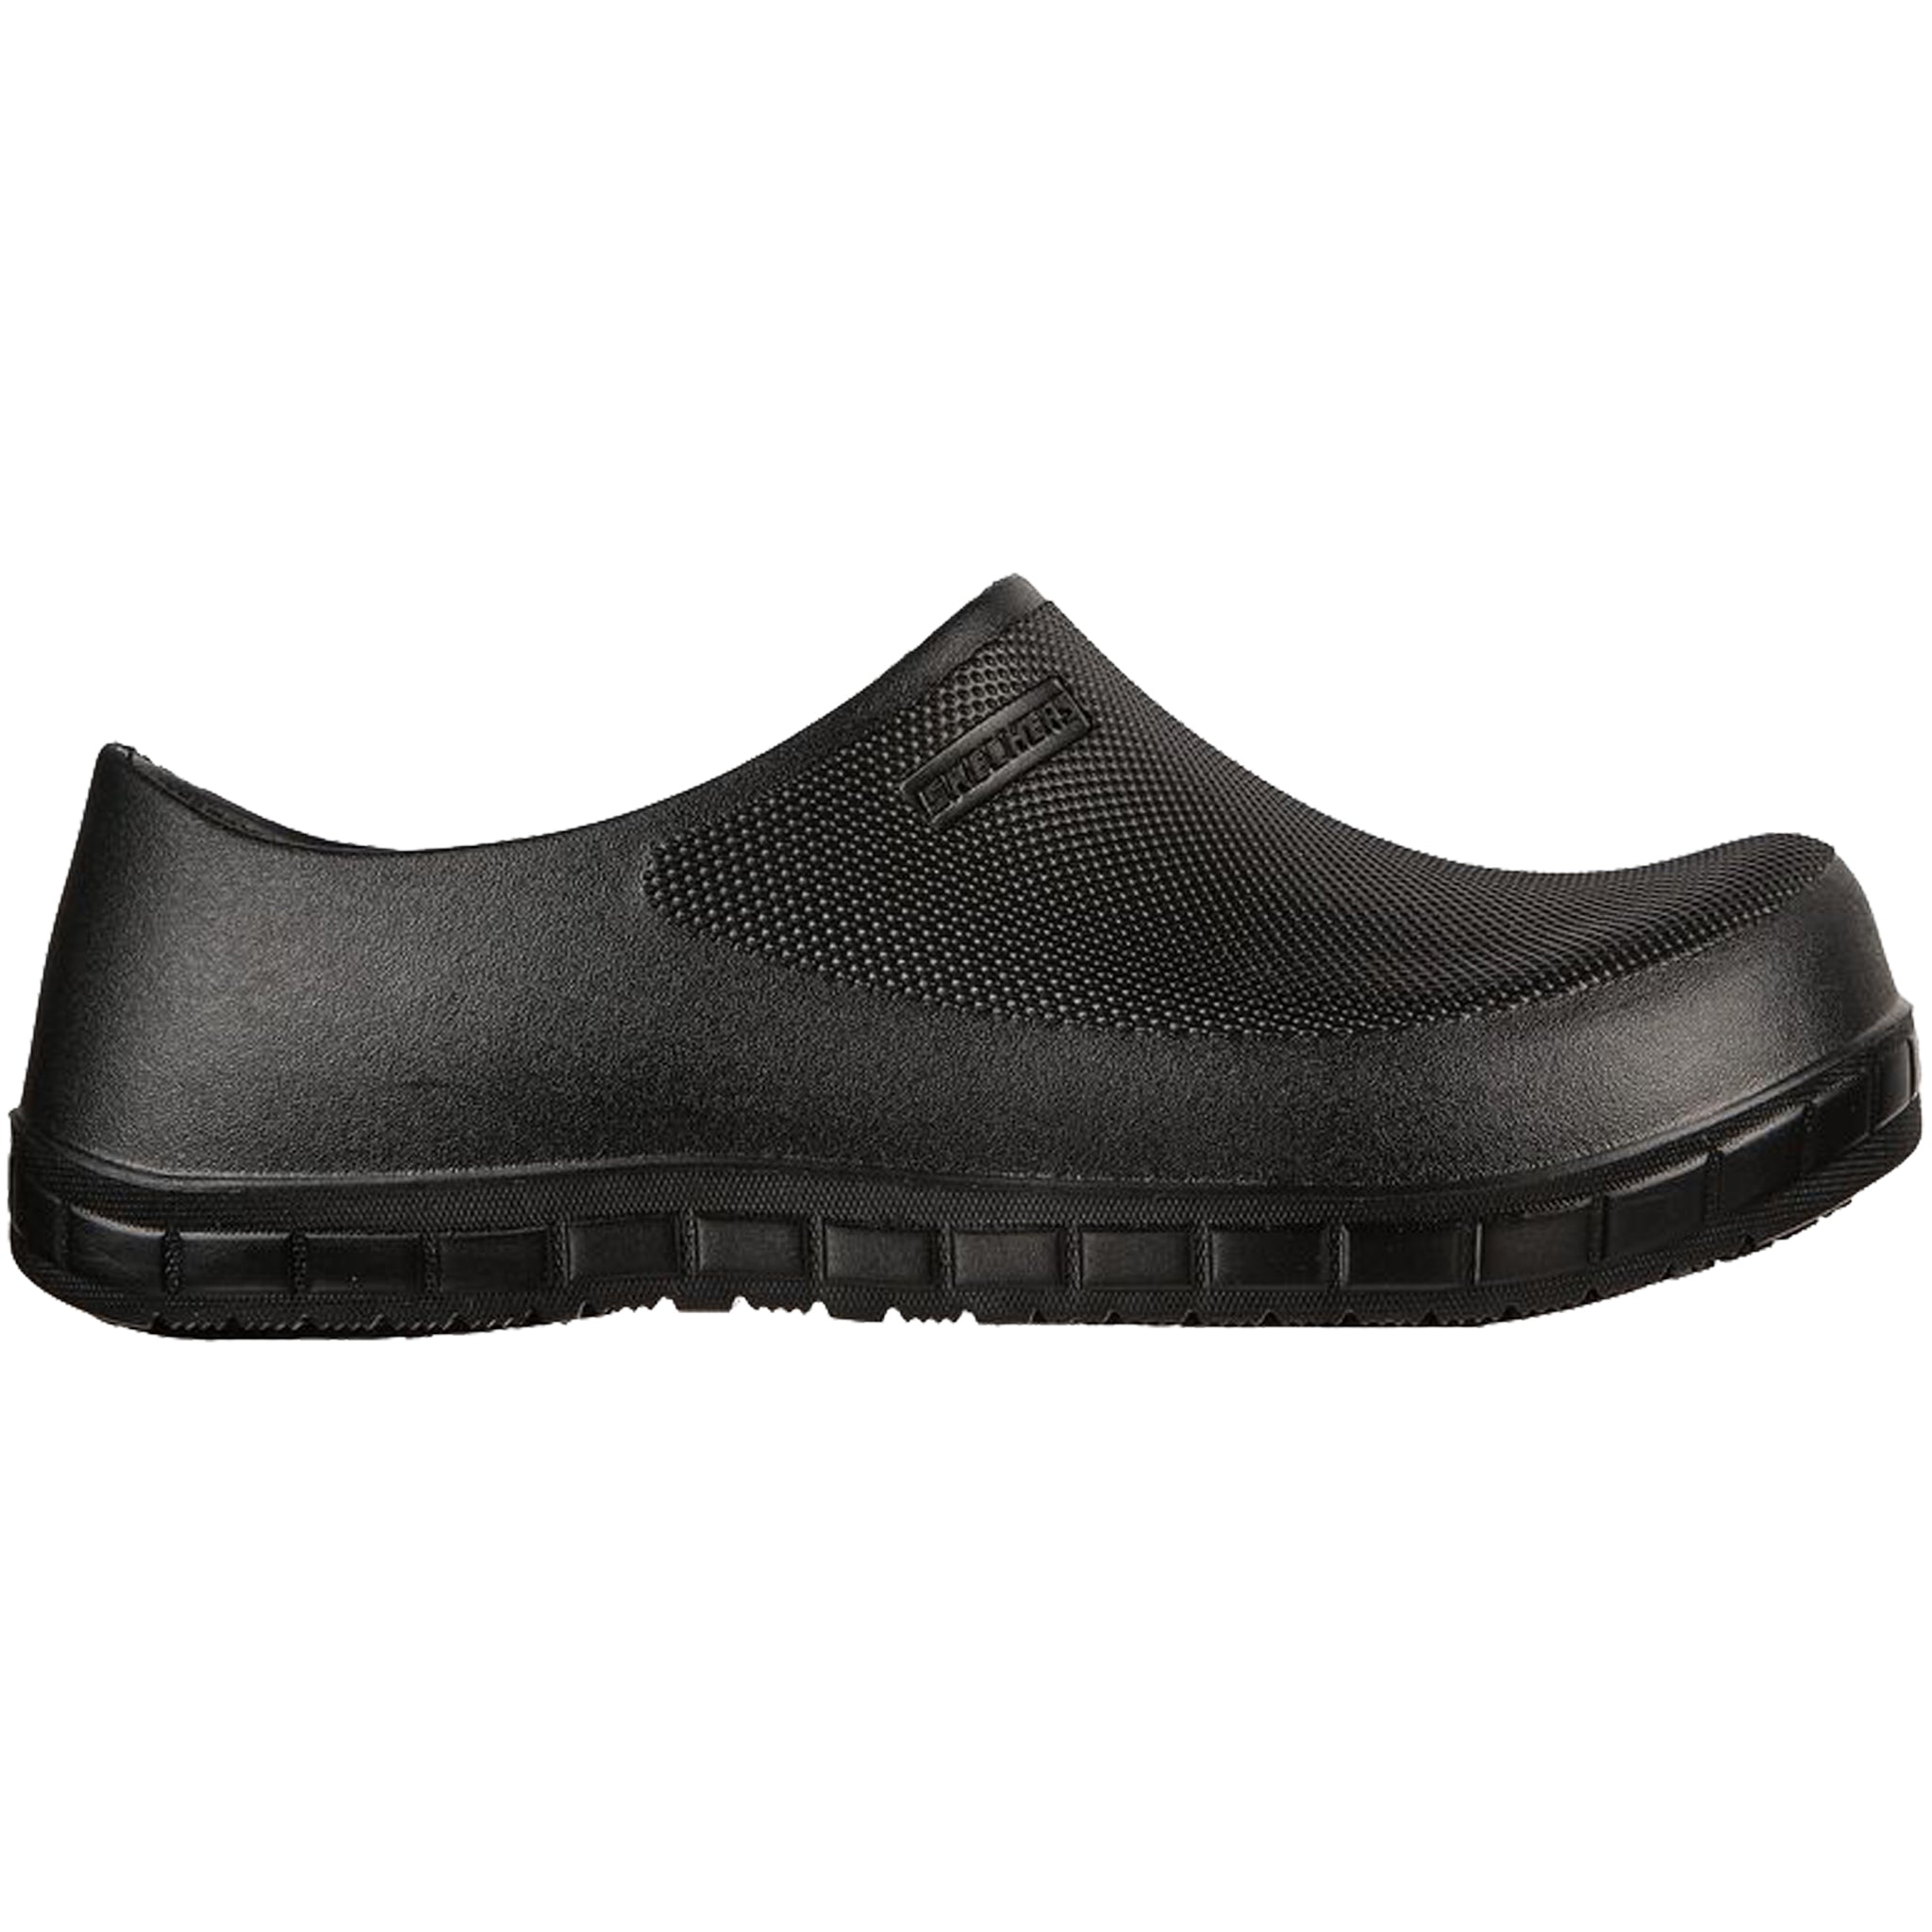 Skechers Women's 108048 Work Evaa Slip Resistant On Work Shoes – That Shoe Store and More